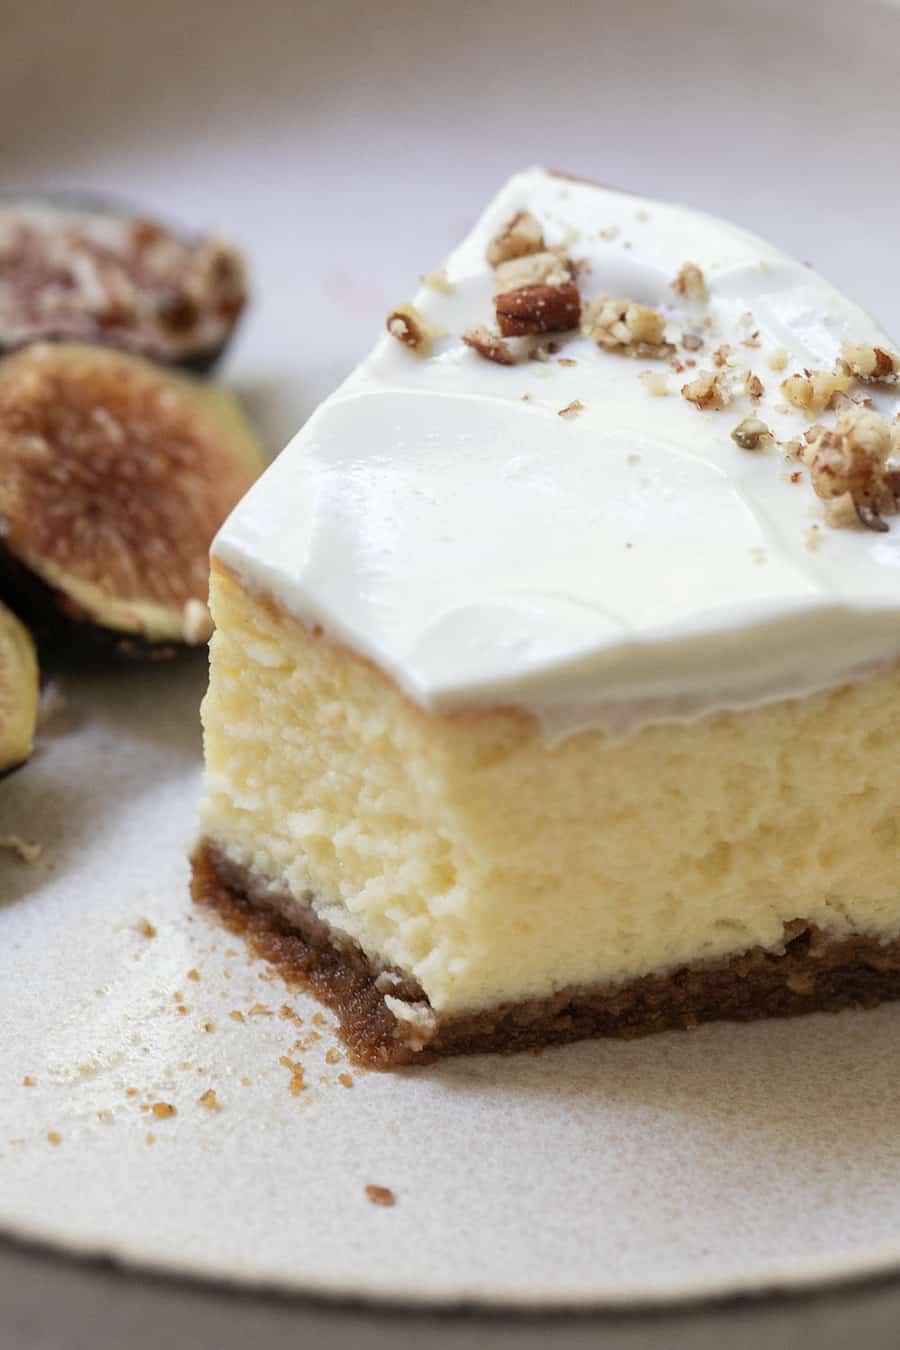 Slice of cheesecake with sour cream frosting and walnuts.